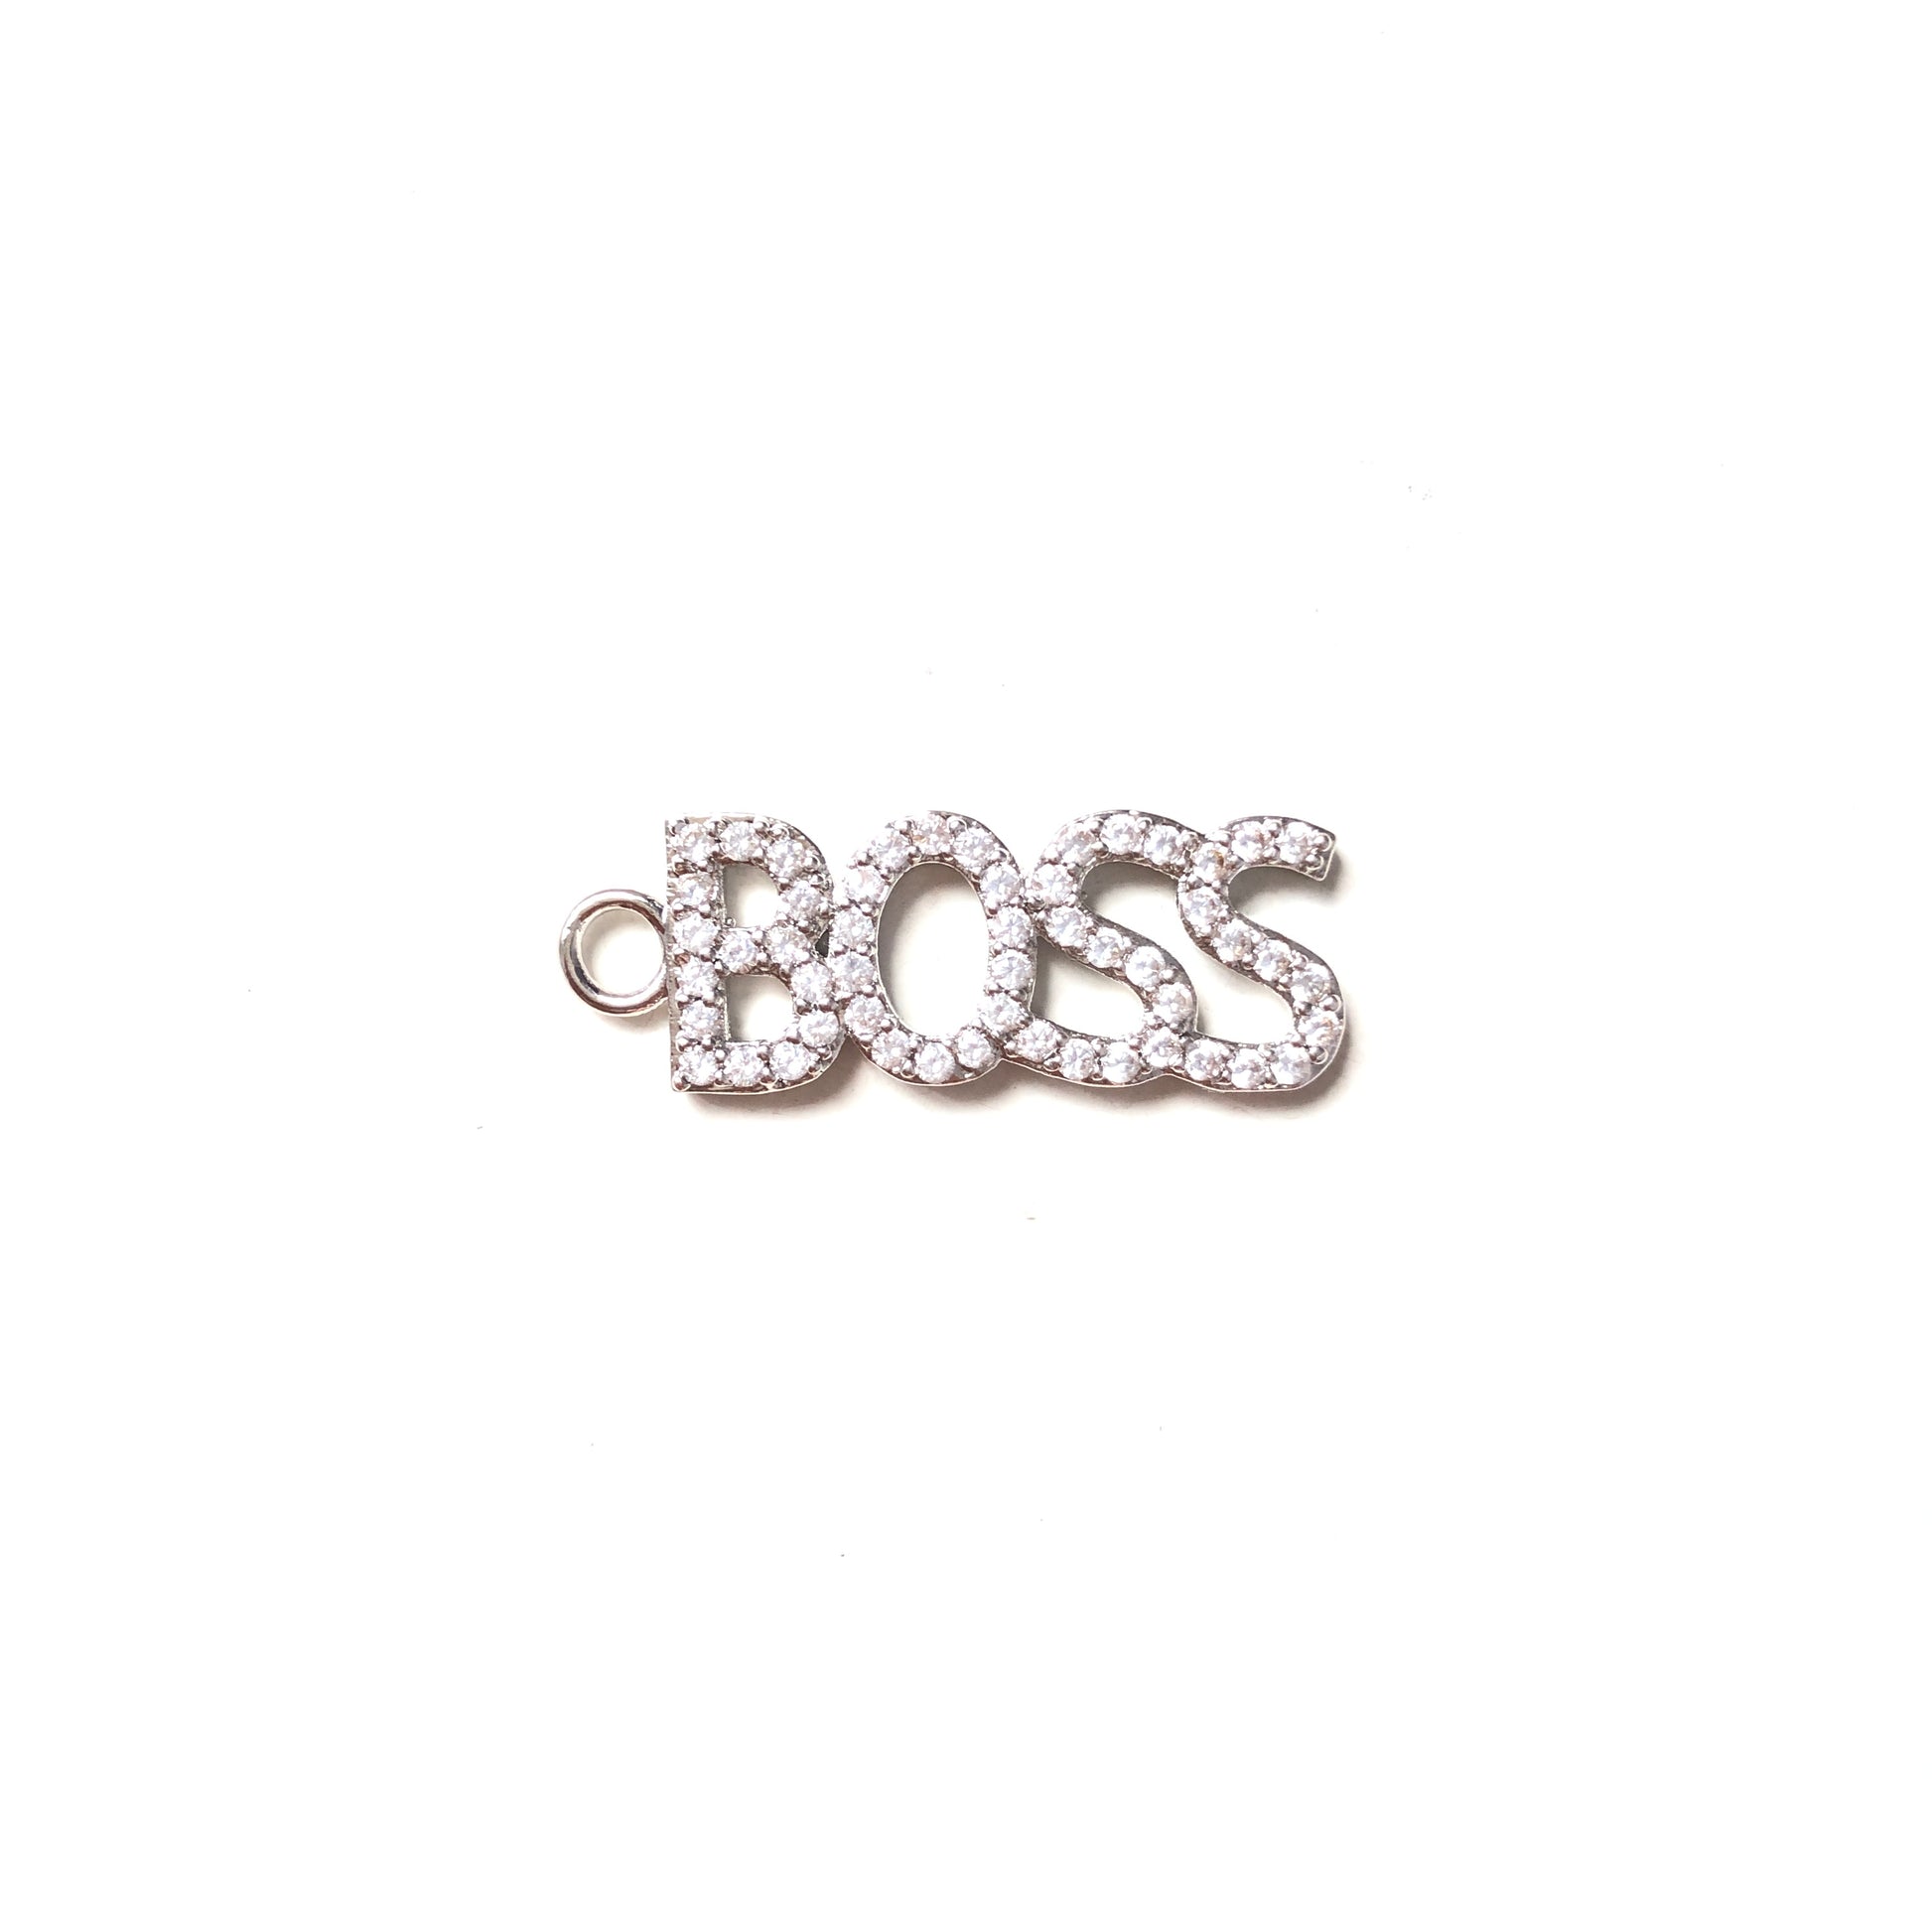 10pcs/lot Silver CZ Paved Letter Charms BOSS-10pcs CZ Paved Charms Love Letters Mother's Day Words & Quotes Charms Beads Beyond